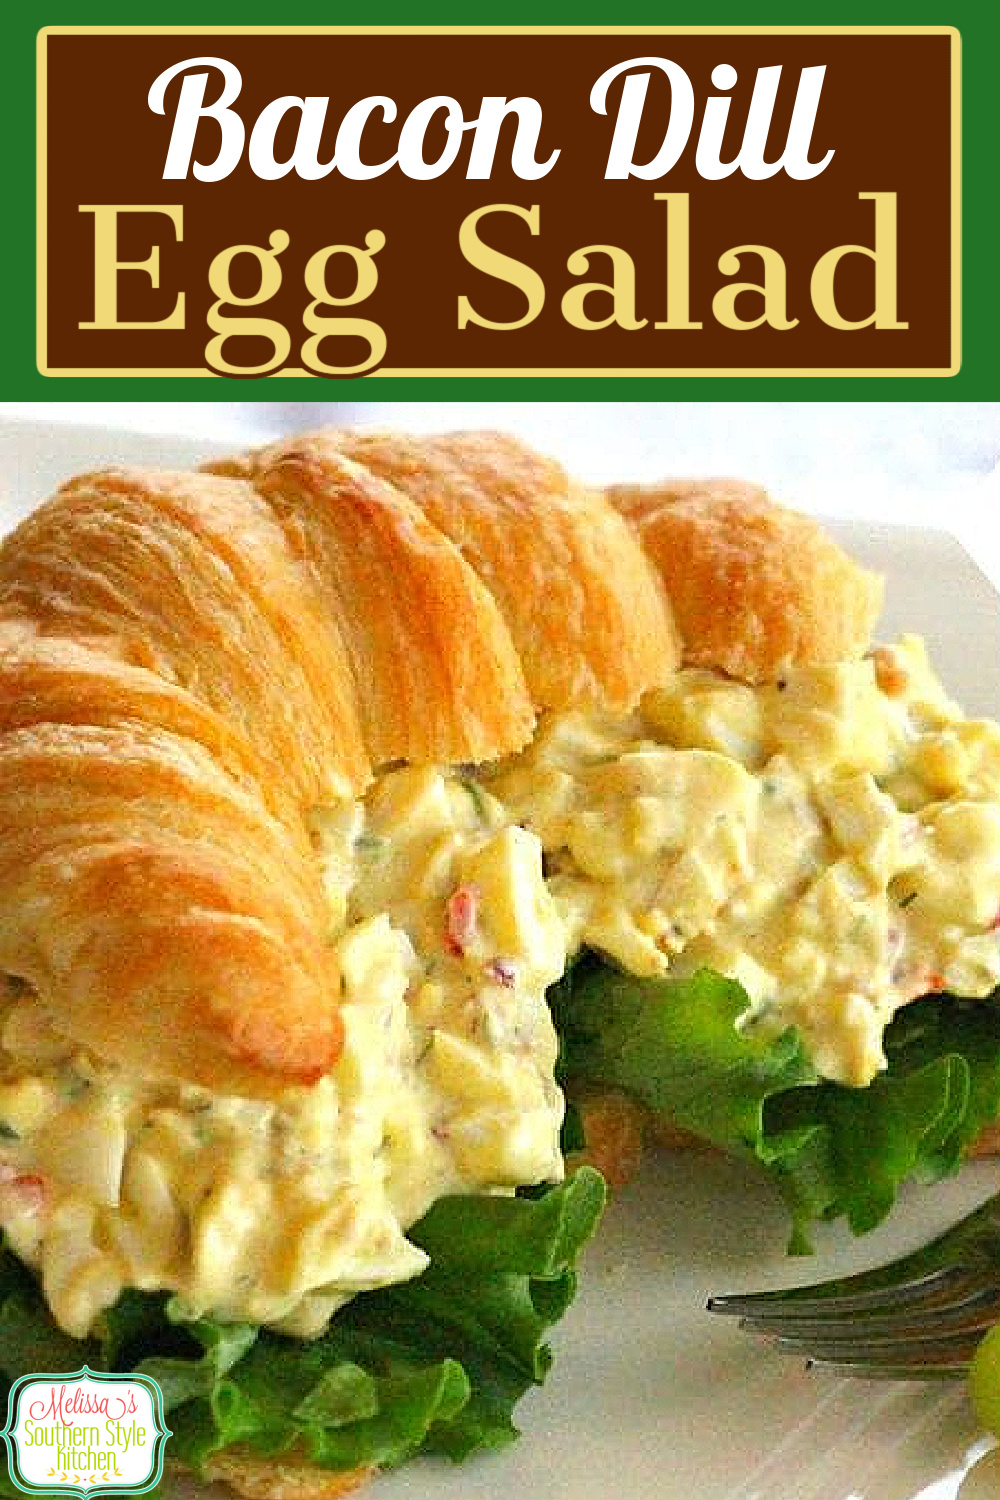 Take egg salad up a notch with the addition of bacon and dill! #eggsalad #baconandeggs #baconeggsalad #dill #saladrecipes #easyrecipes #dinner #dinnerideas #eggs #southernfood #brunch #lunch #sandwiches #salads #bacon #southernrecipes via @melissasssk